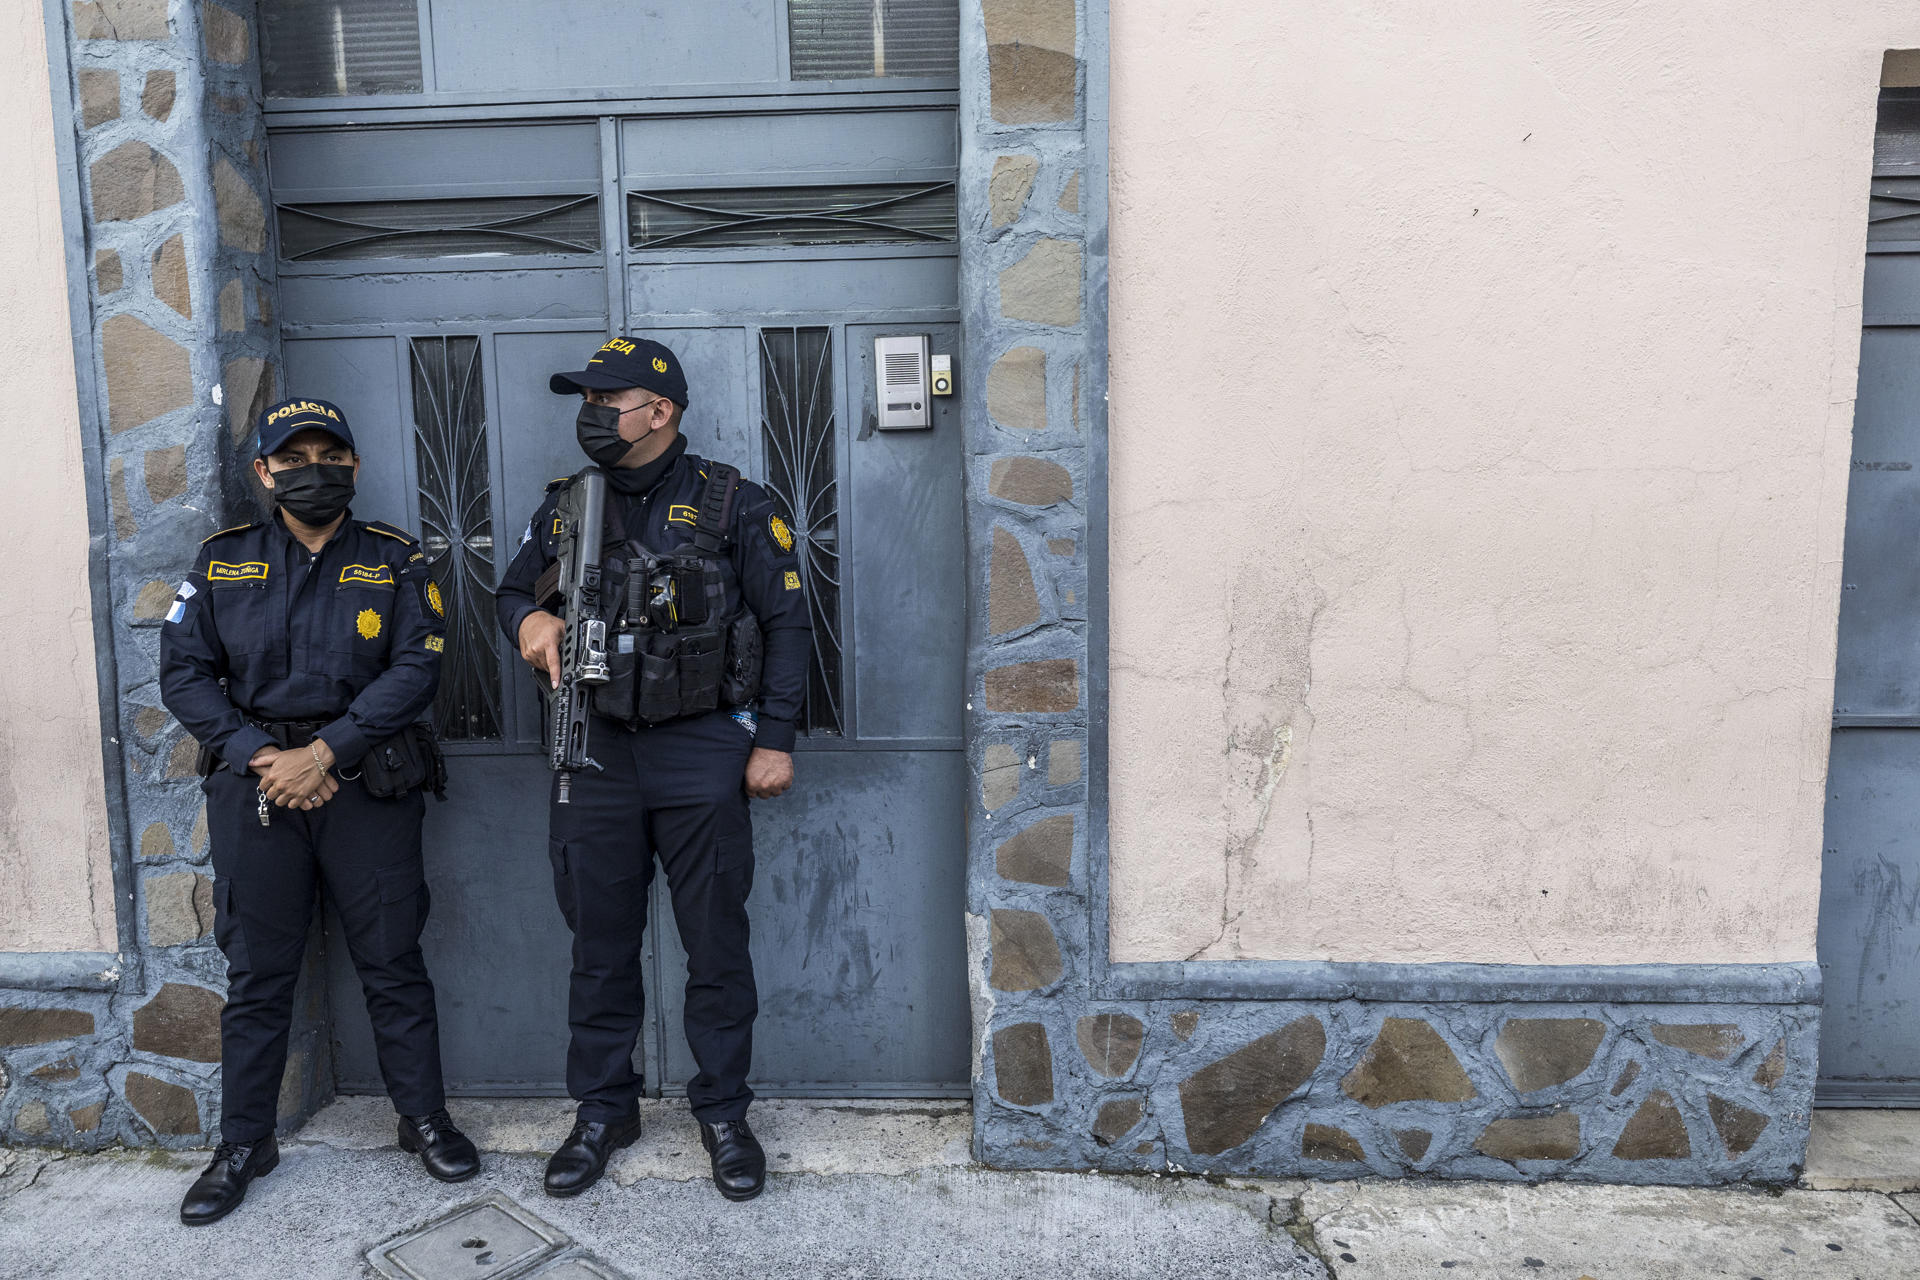 Agents of the Guatemalan Attorney General's Office stand guard during a search of the seat of the Supreme Electoral Court in Guatemala City on 20 July 2023. EFE/Esteban Biba